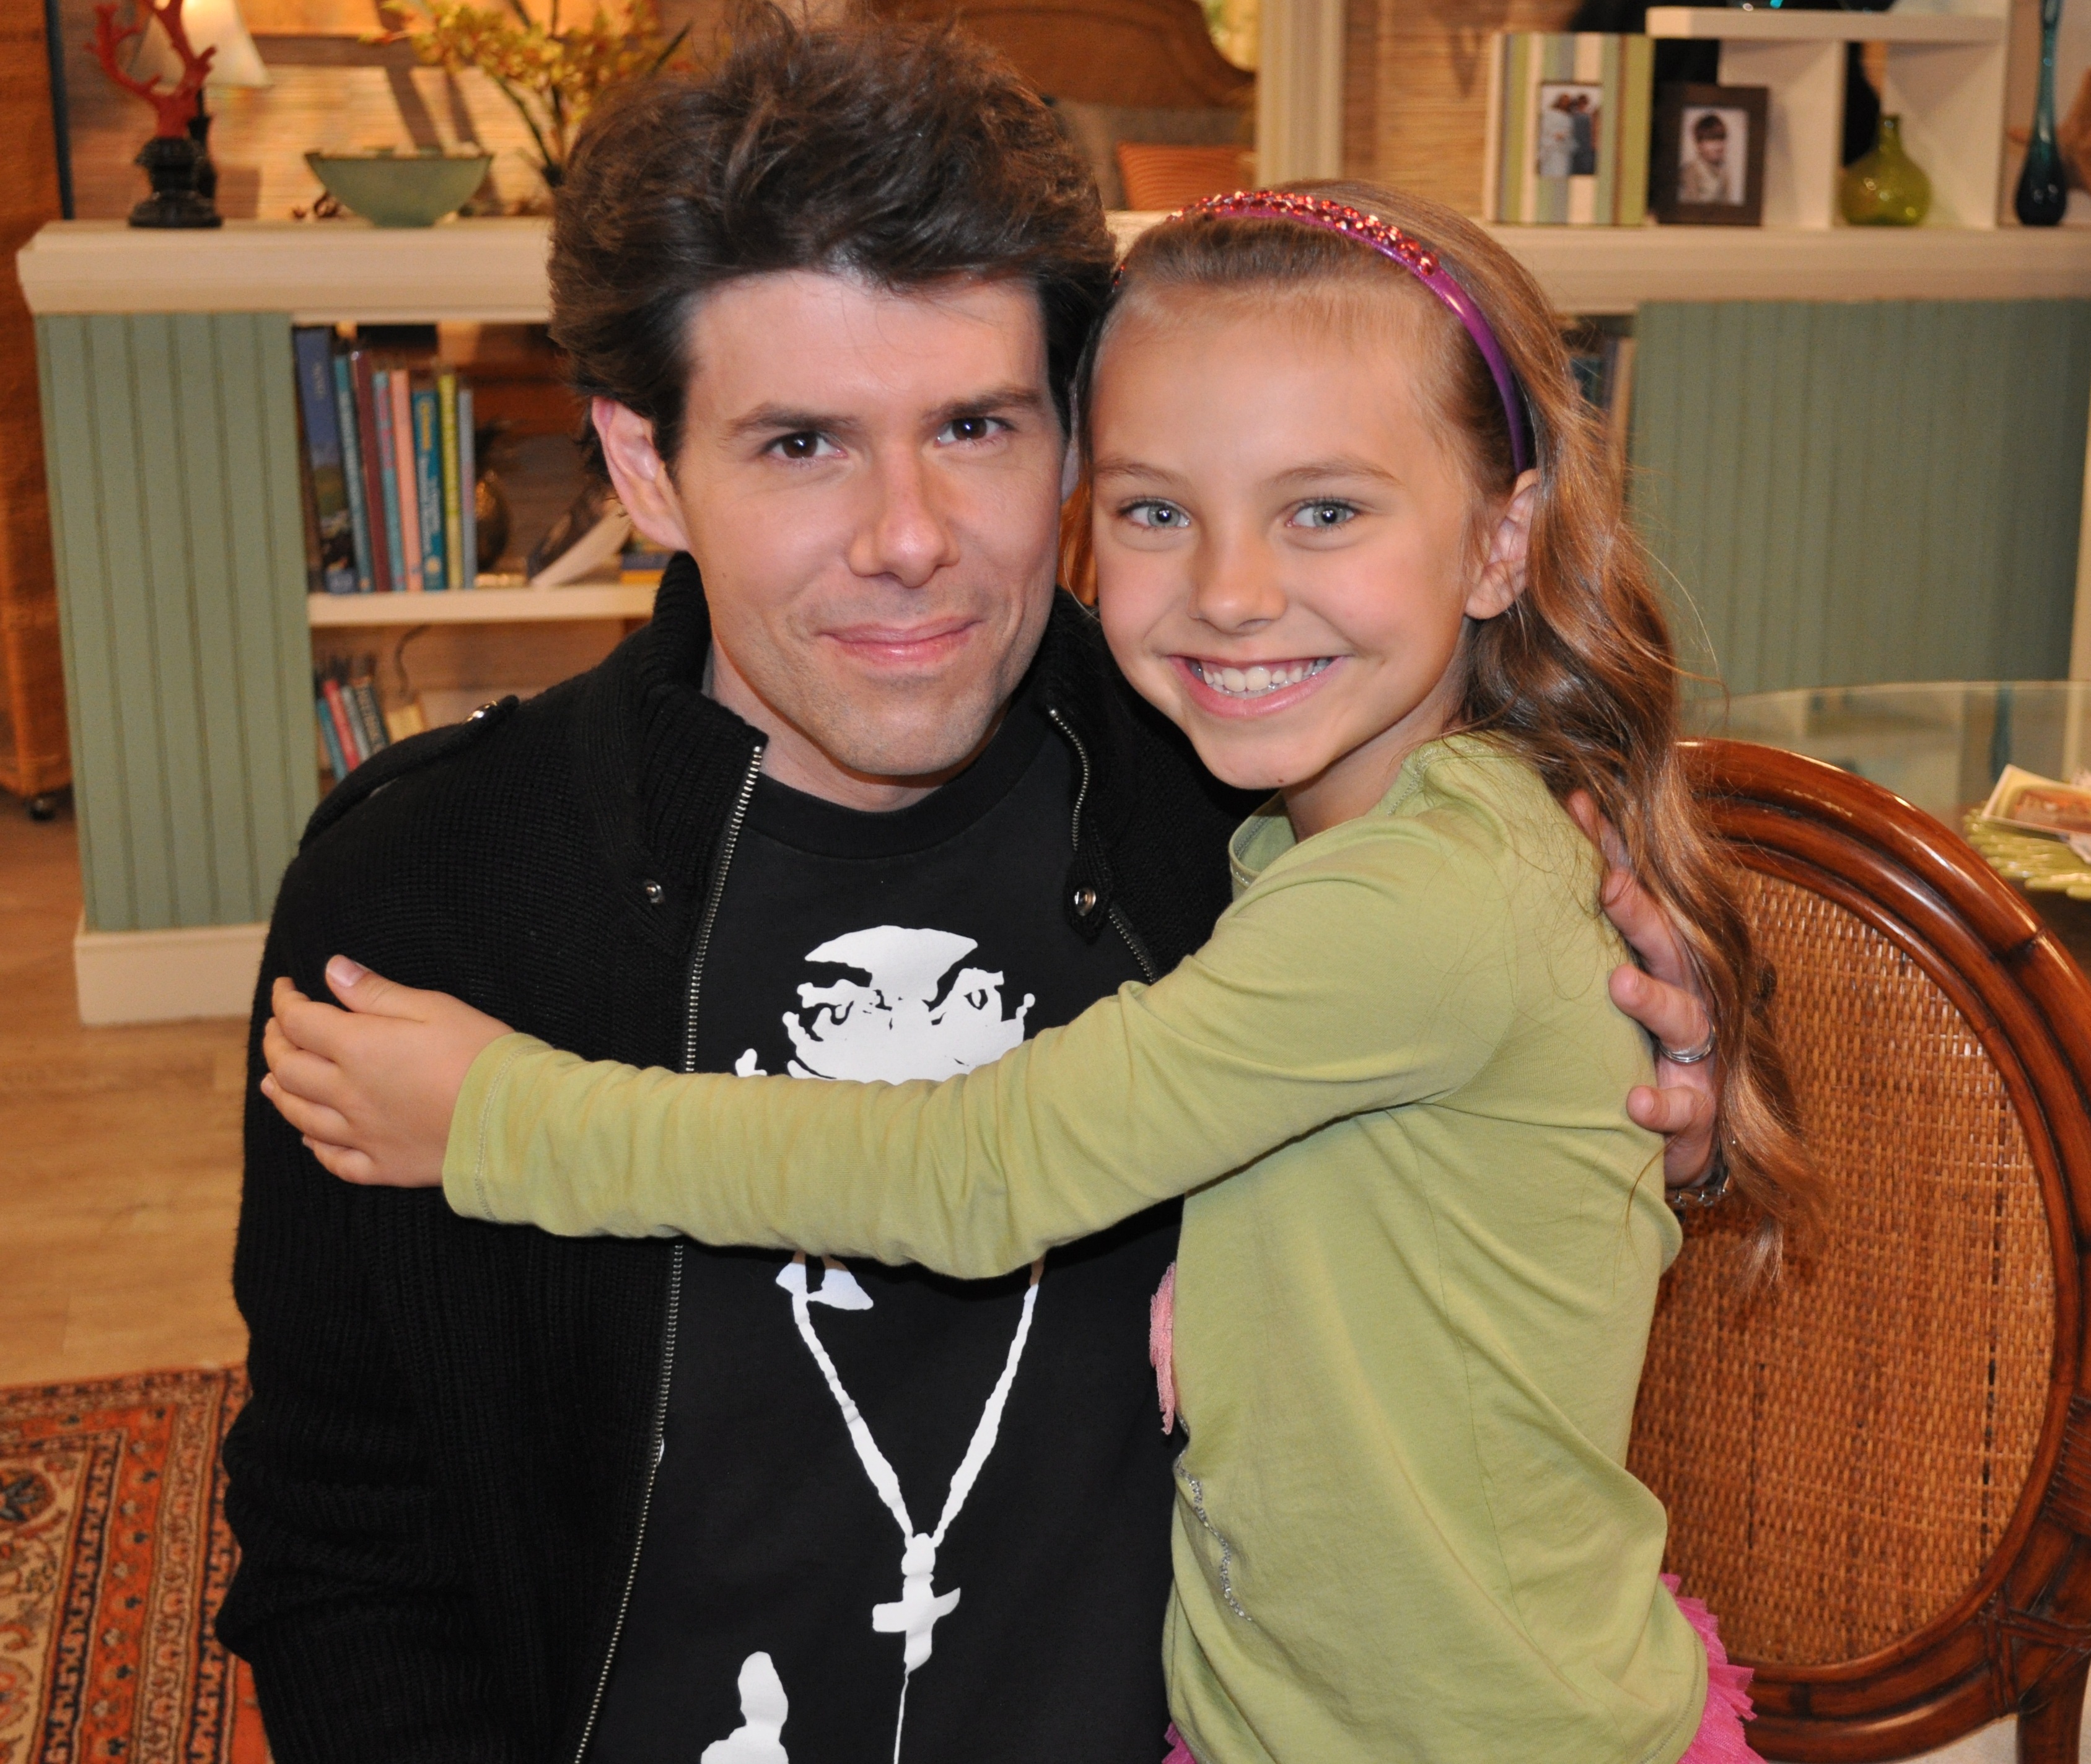 Caitlin Carmichael and Johnathan McClain on set of Retired at 35 November 2011